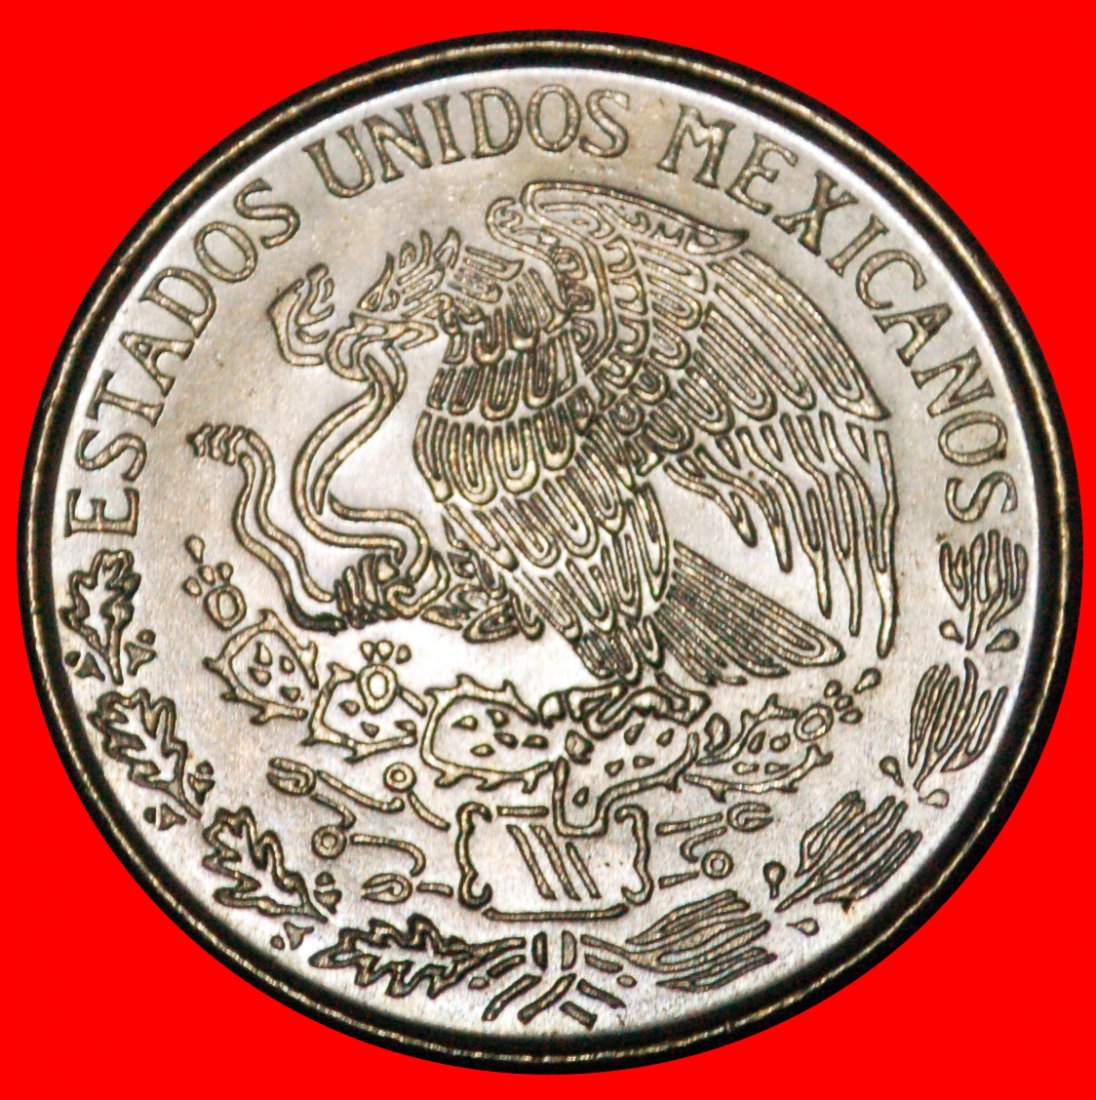  • NOT WIDE DATE: MEXICO ★ 1 PESO 1970 MINT LUSTER! LOW START ★ NO RESERVE!   